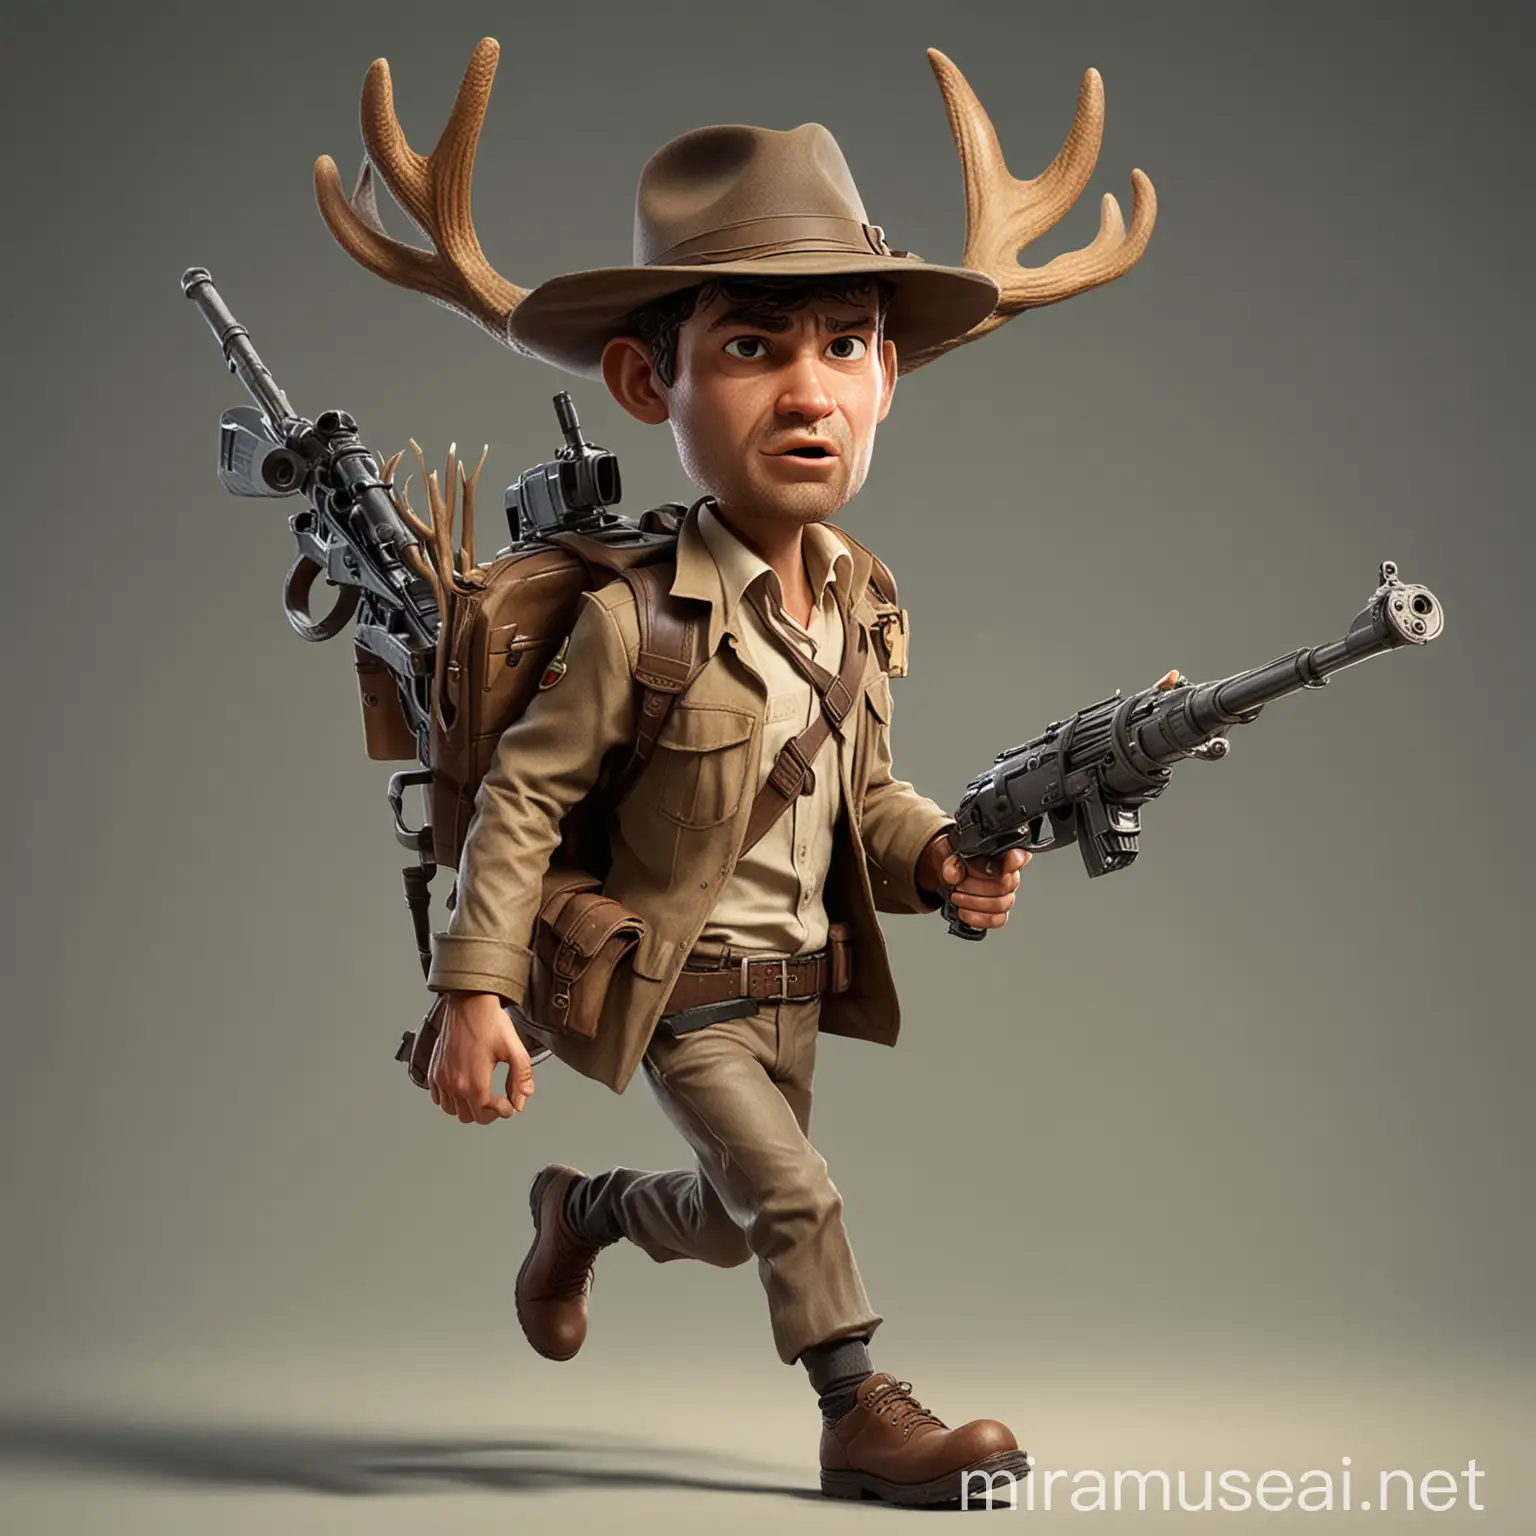 
a character similar to a data storage server, in the style of Indiana Jones, runs with a gun, on his head is a hat with deer antlers, the gun looks like a rifle from Star Wars